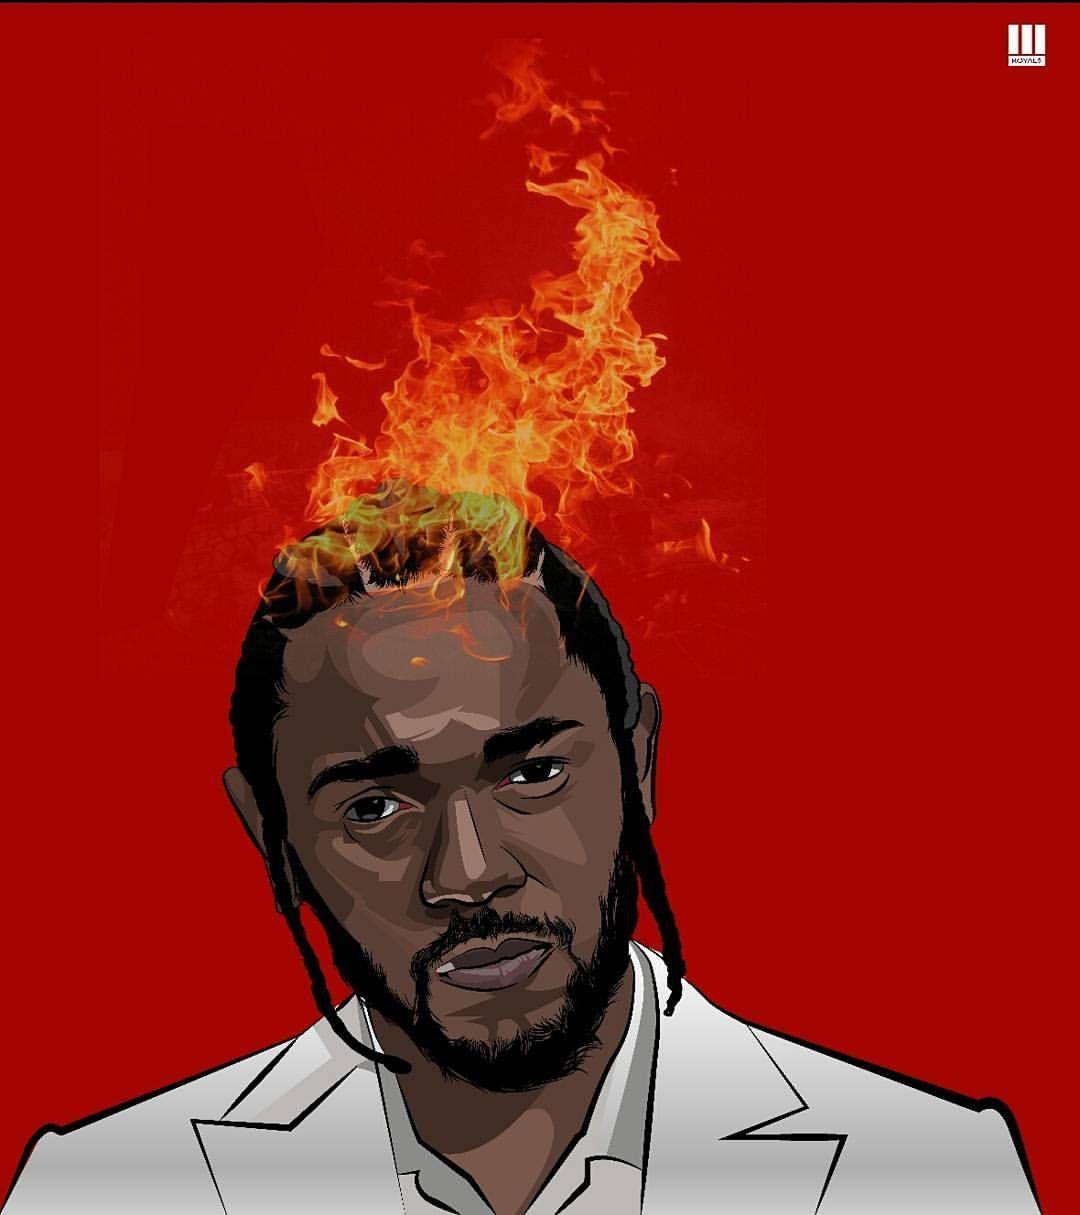 Related image. pay attention. Kendrick Lamar, Rap, Hip hop